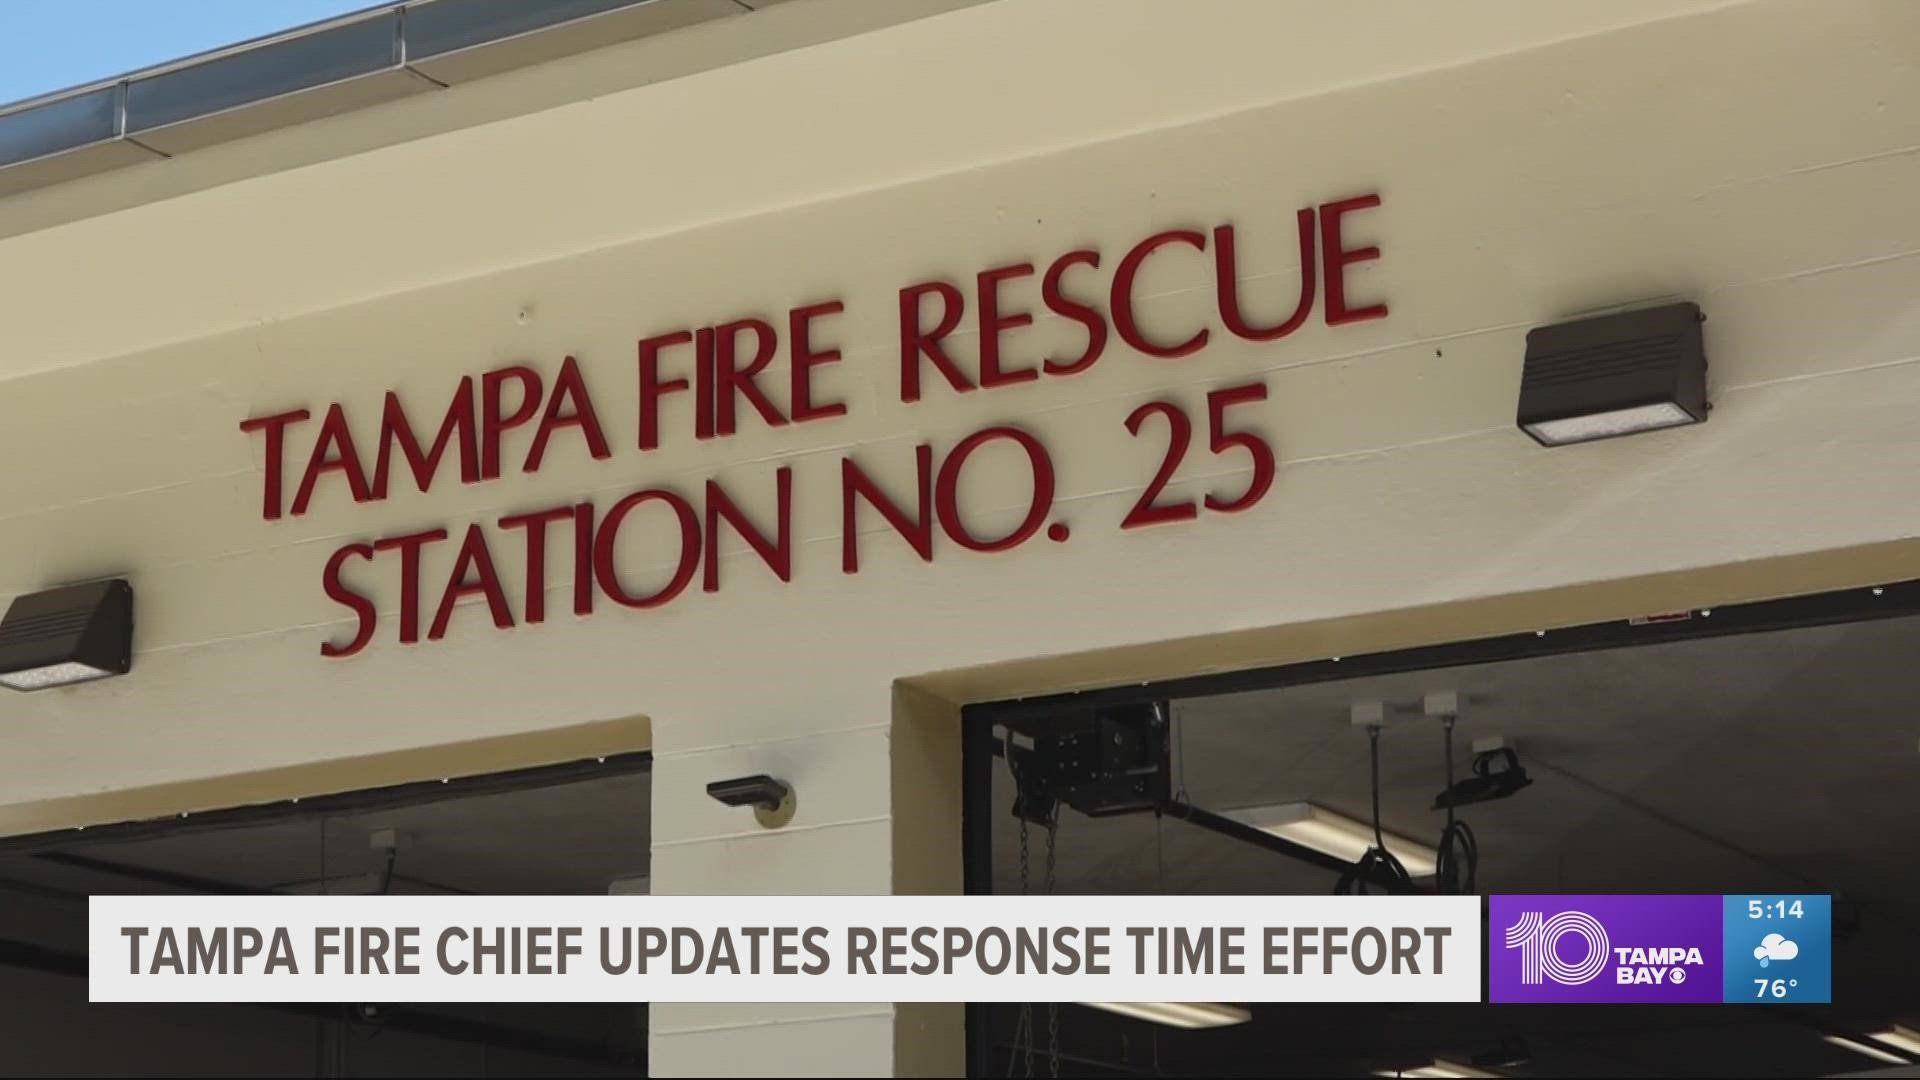 Station 25 opened in August. It was remodeled and redesigned with $3.4 million dollars from the American Rescue Plan.